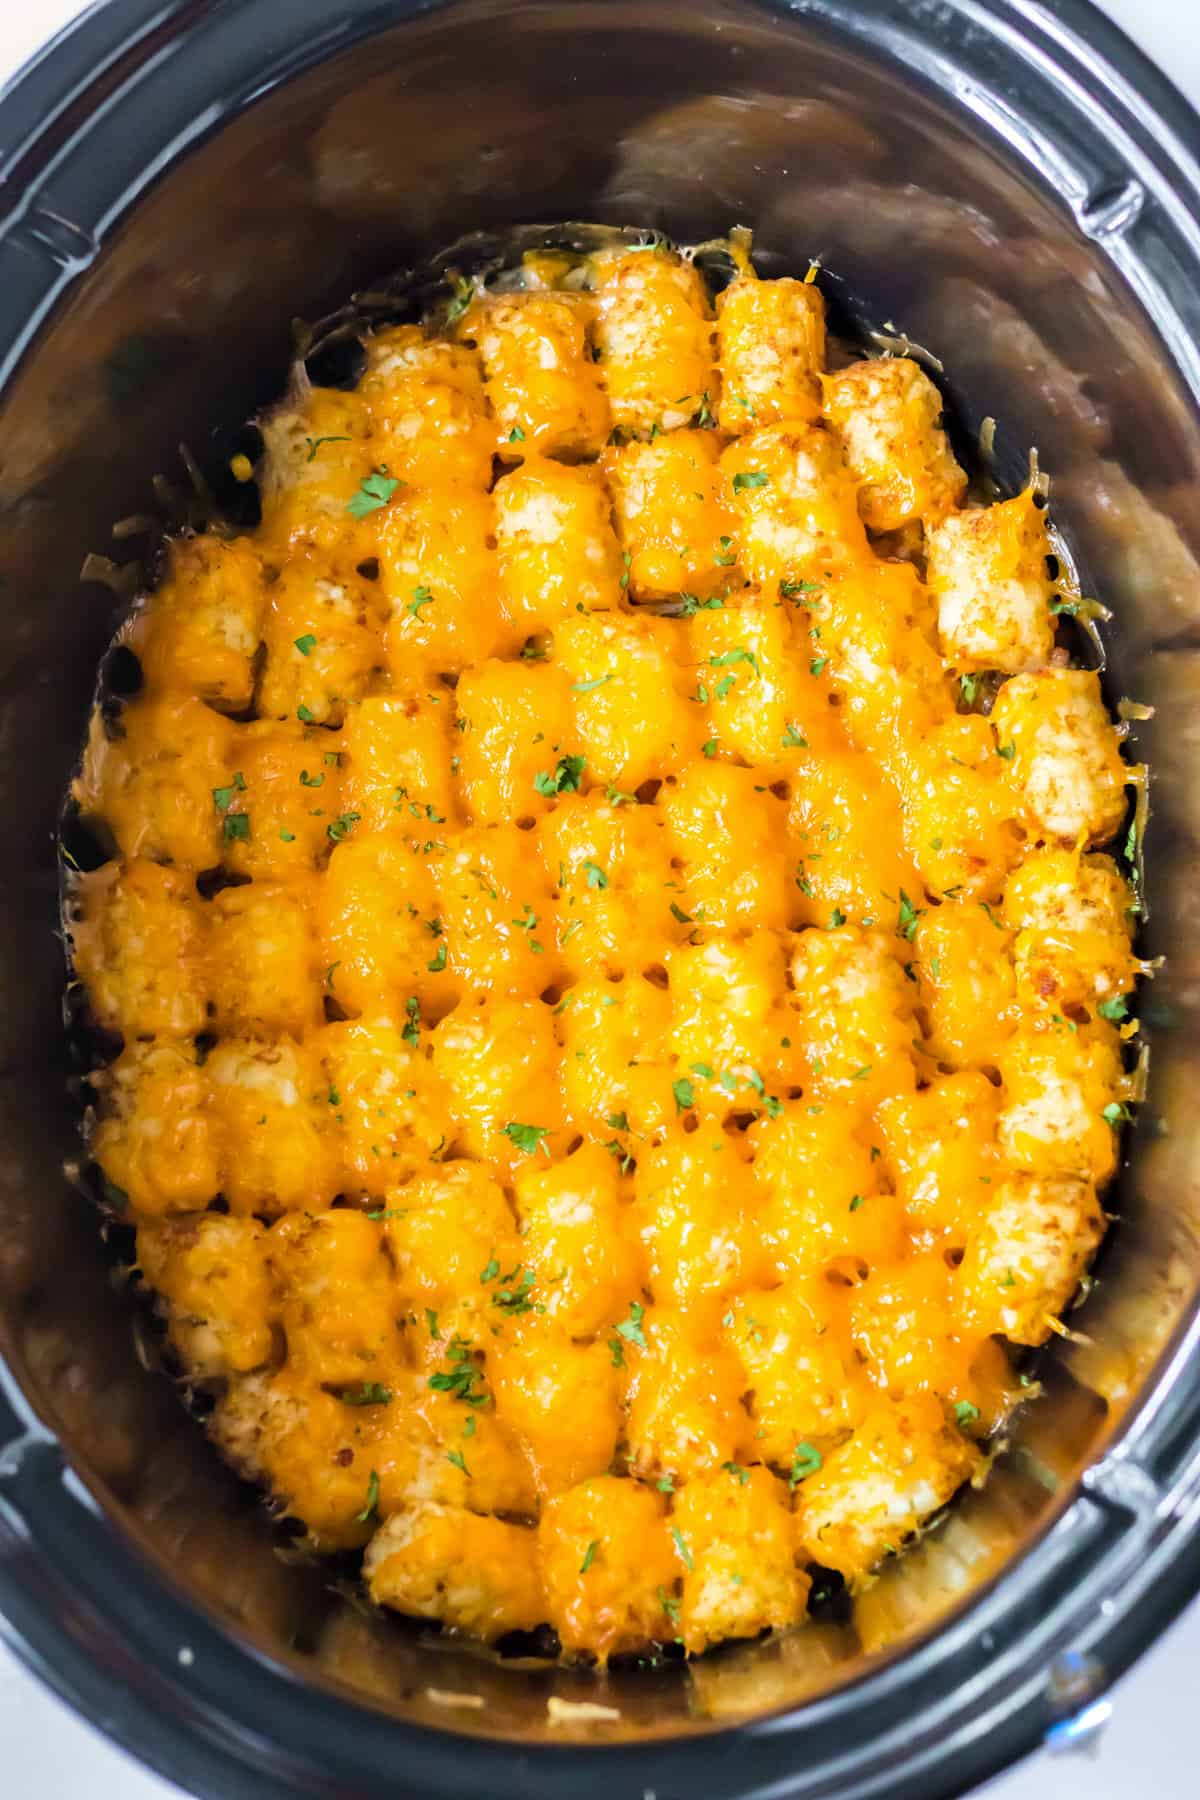 Slow cooker tater tot casserole topped with melted cheese.